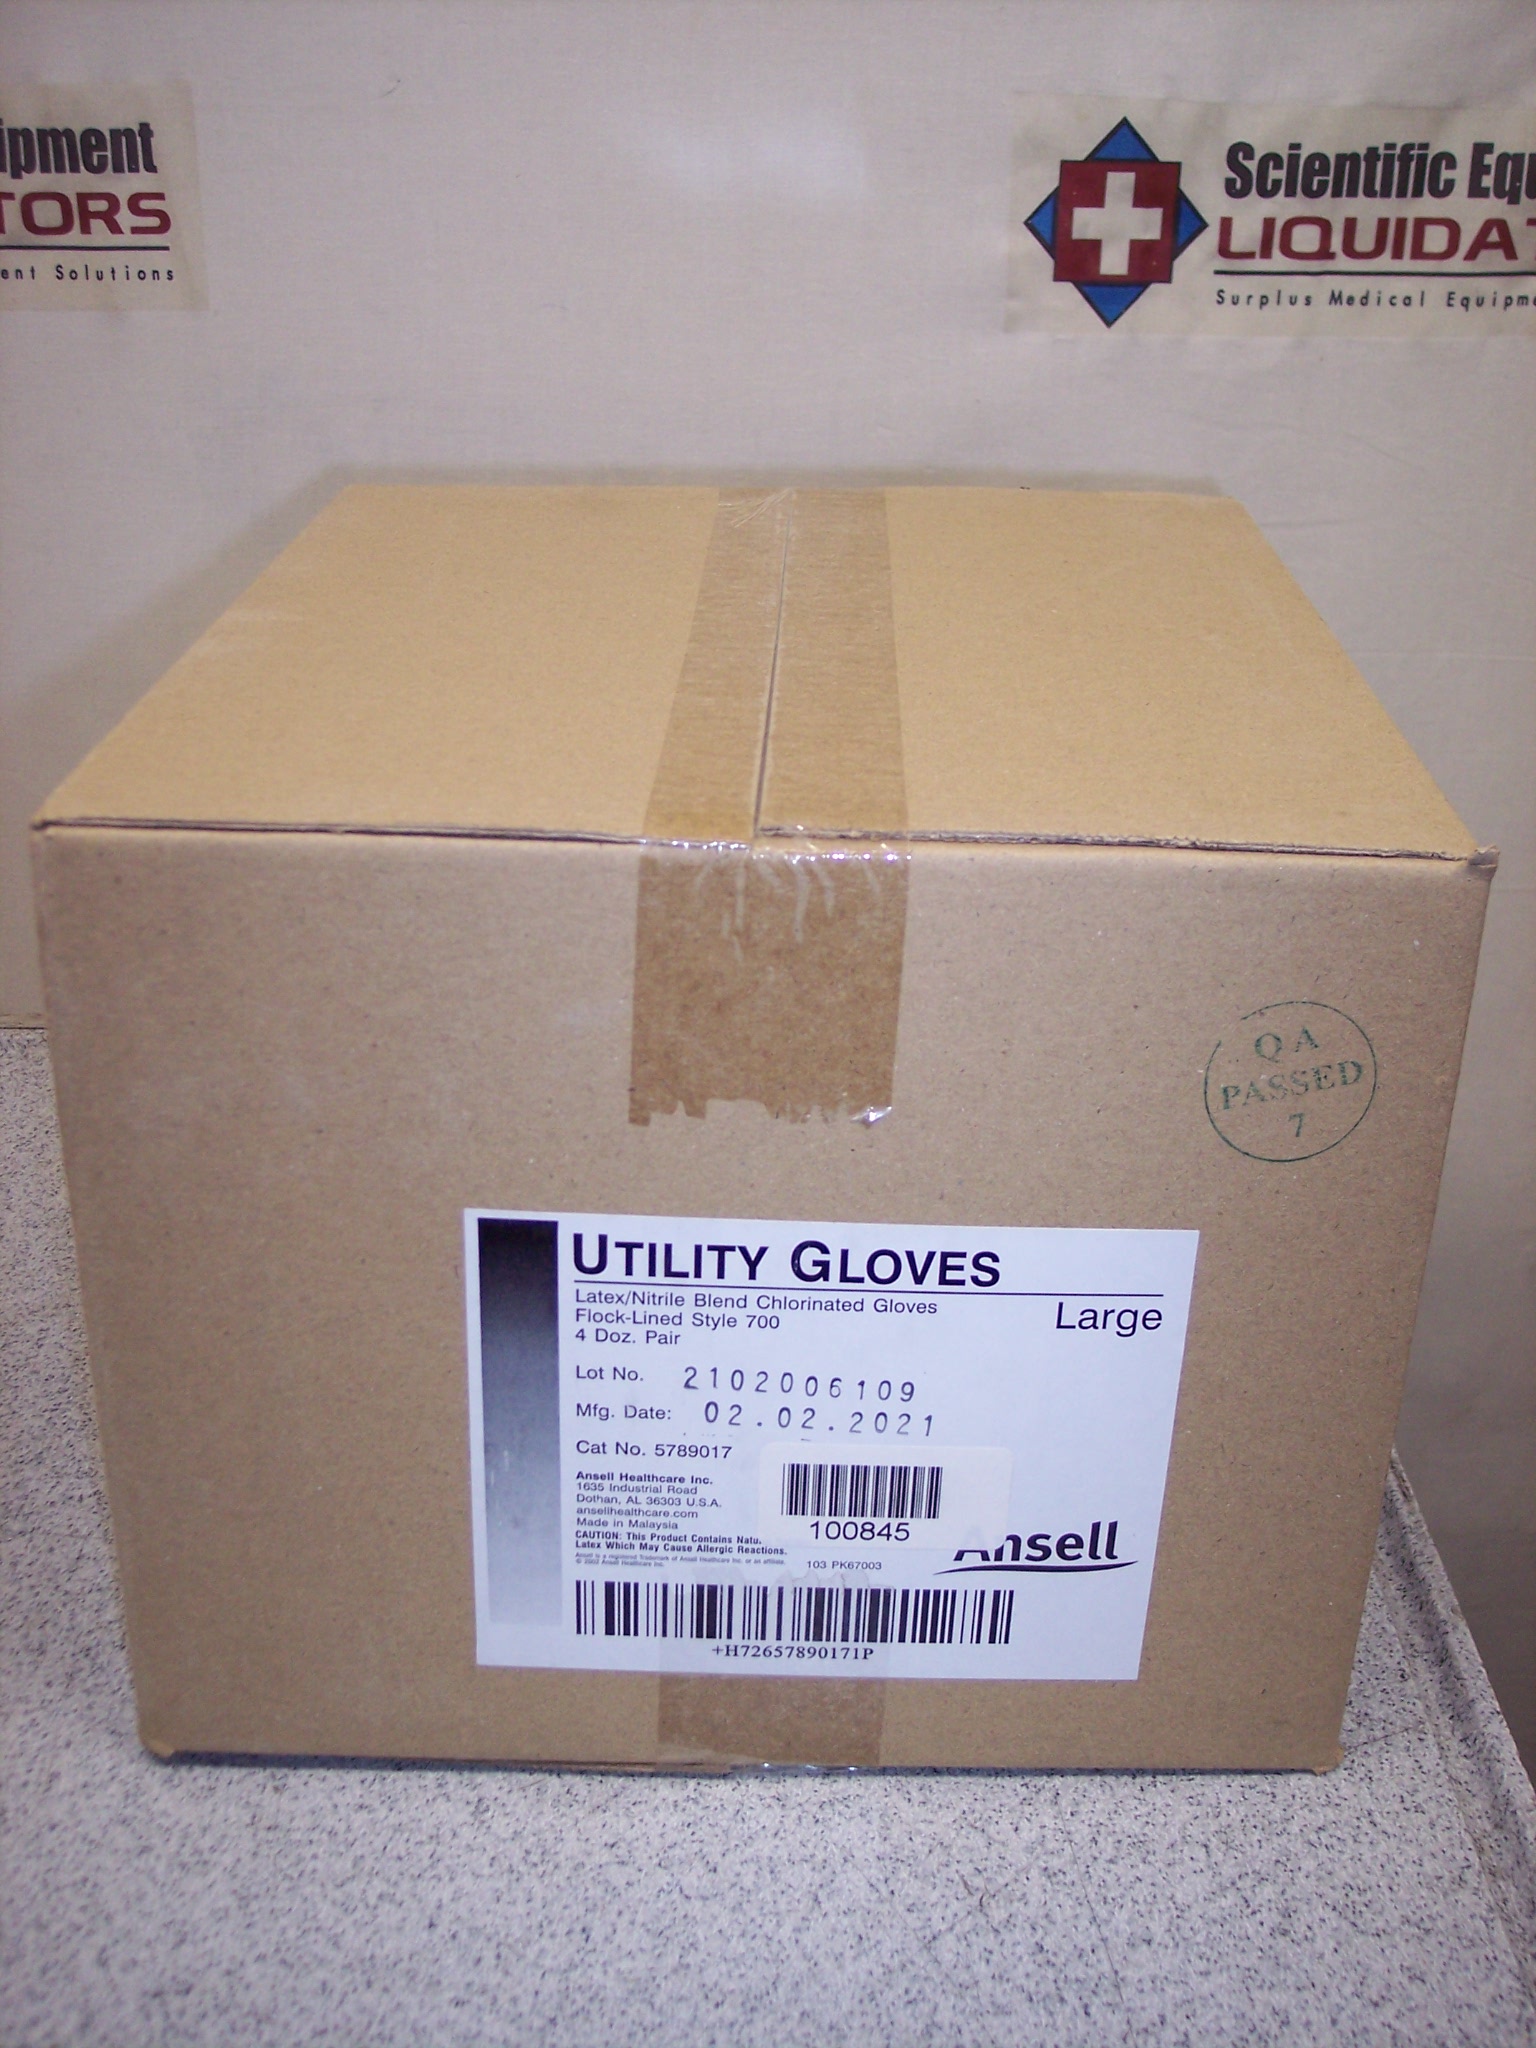 Ansell Utility Gloves 5789017 Latex/Nitrile Blend Chlorinated Gloves Flock-Lined Style 700, Size Lar